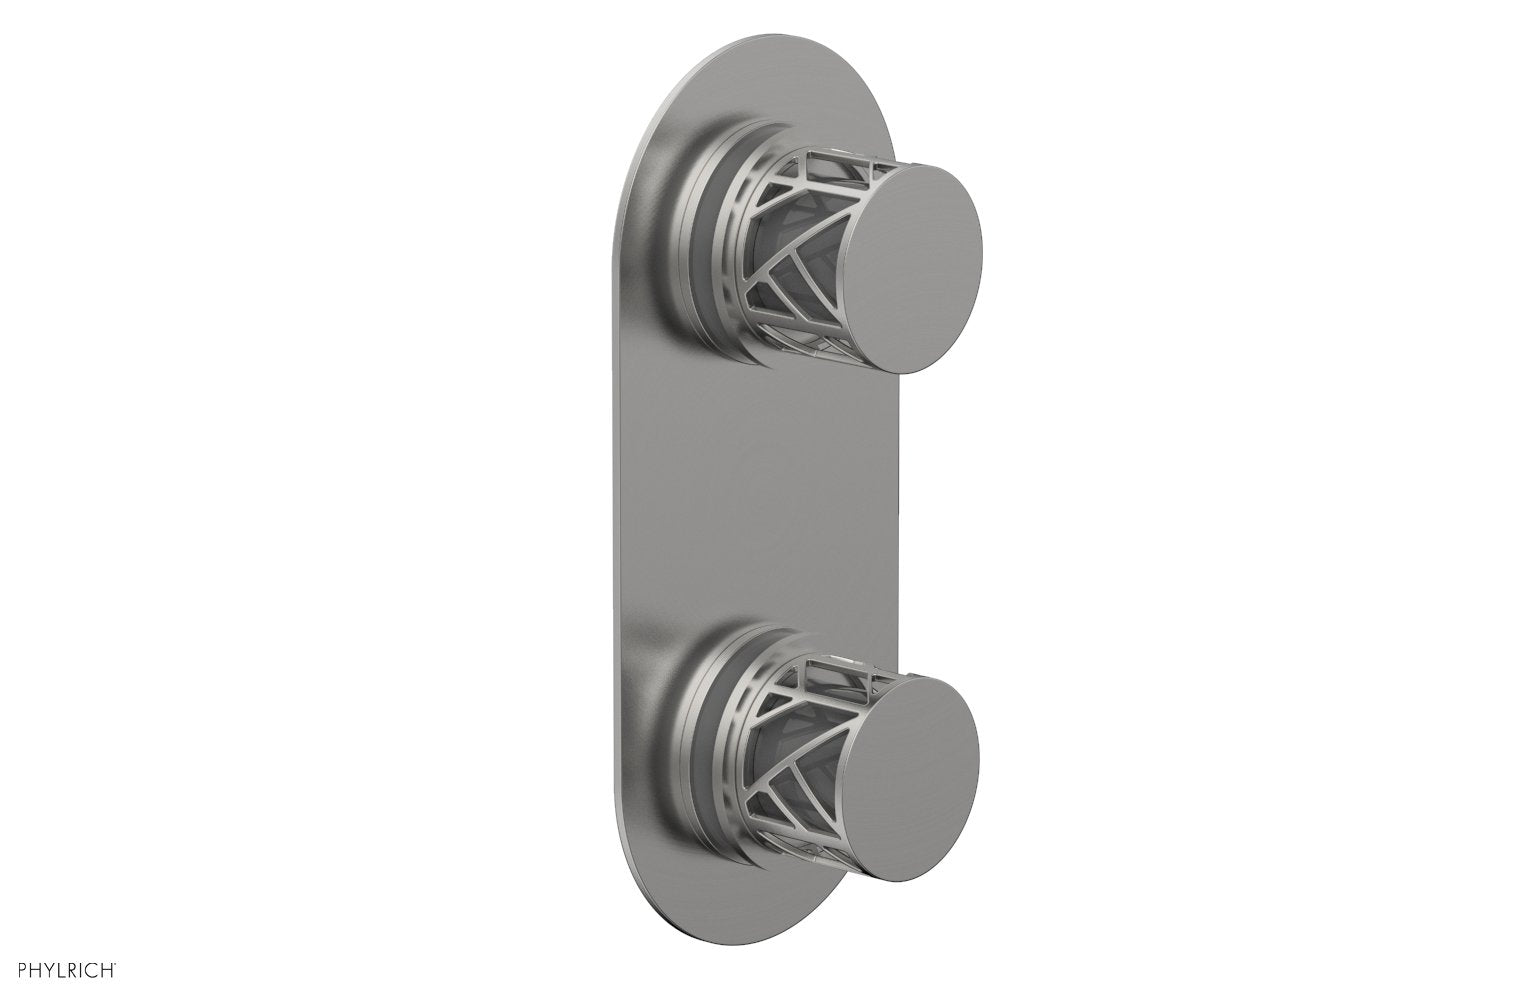 Phylrich JOLIE Thermostatic Valve with Volume Control or Diverter with "Grey" Accents